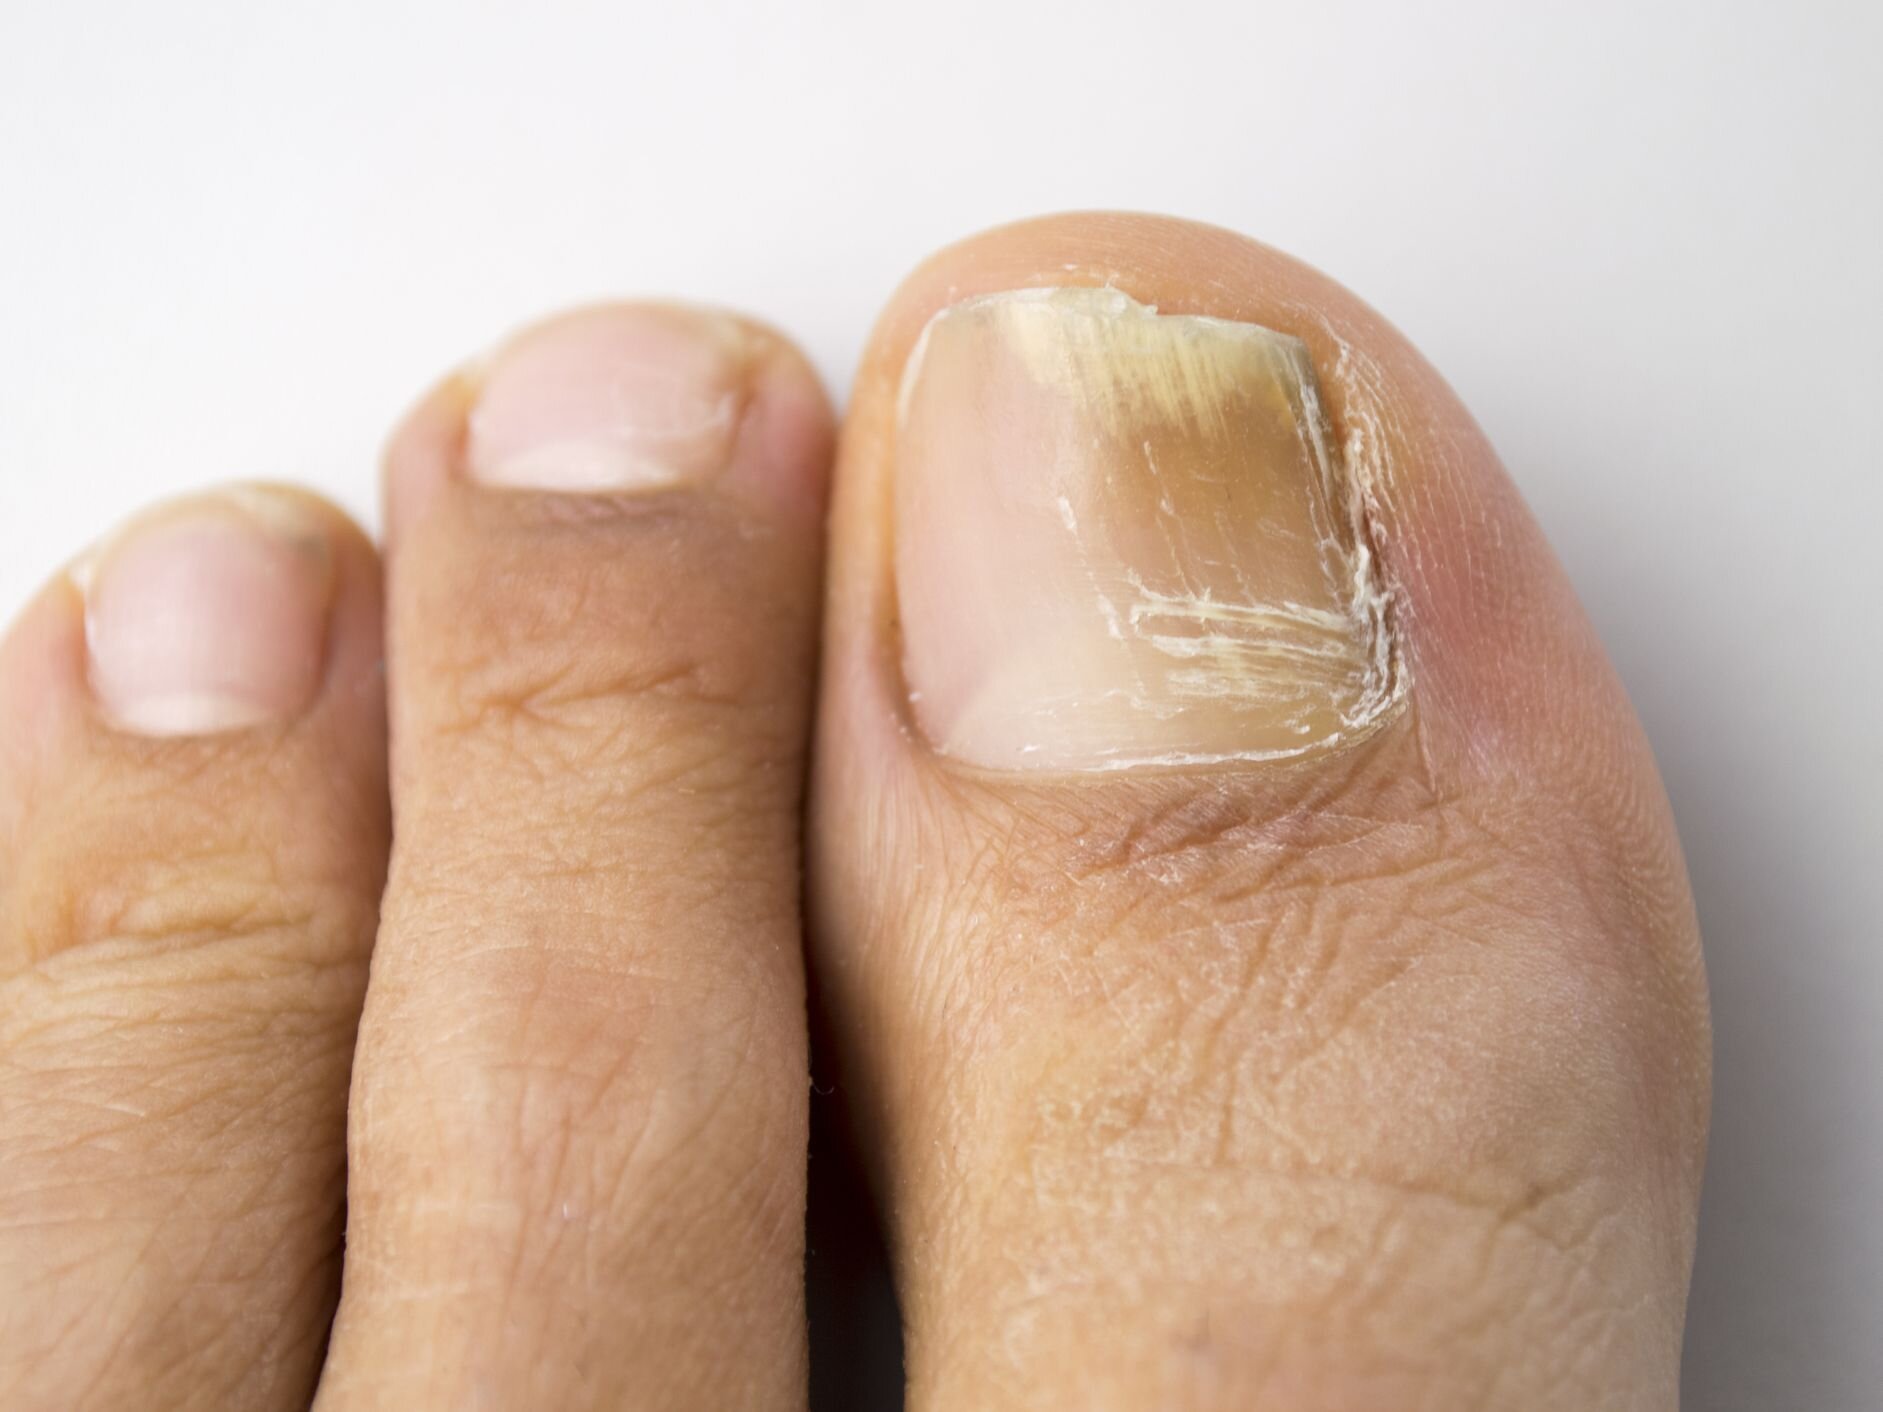 Fungal Nail Infection: Causes, Symptoms And Treatment